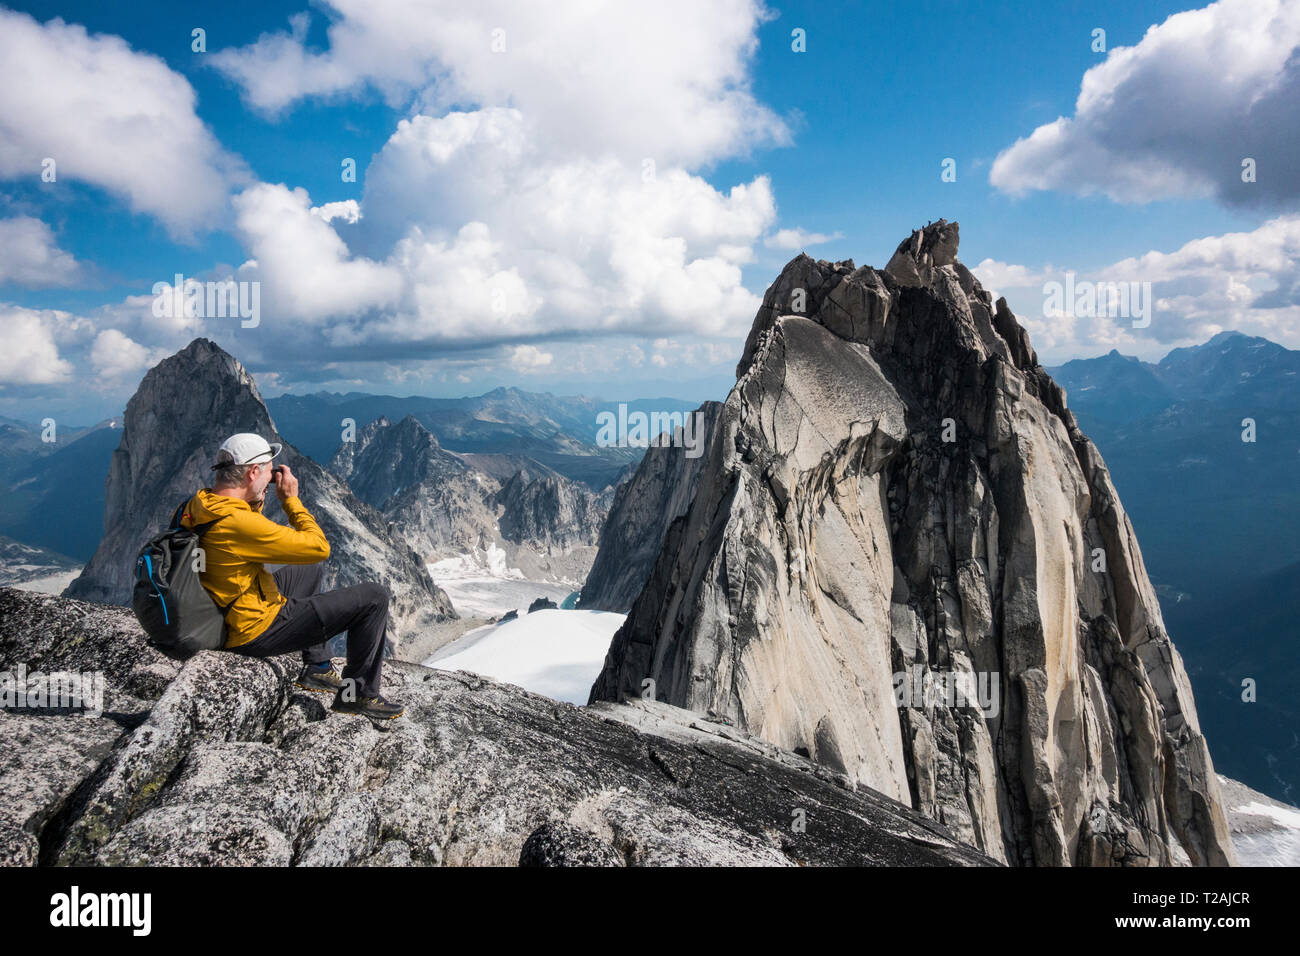 Man photographing mountain in Bugaboo Provincial Park, British Columbia, Canada Stock Photo